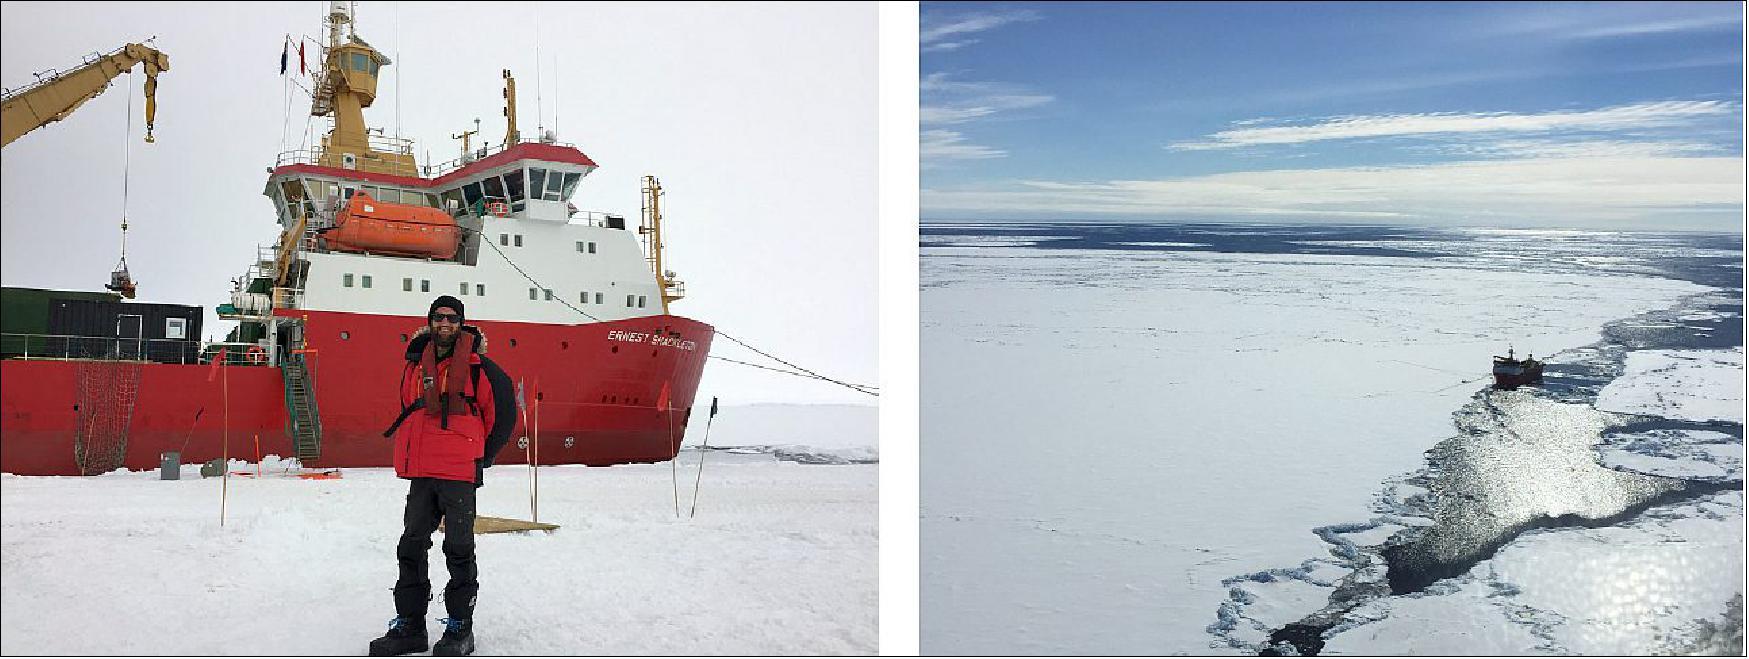 Figure 37: Left: R/V Ernest Shackleton at Three Ronne Depot (Alex Coccia, Metasensing, in front). Right: R/W Shackleton moored at large ice floe in the central Weddell Sea (photos: Dave Landy, BAS)